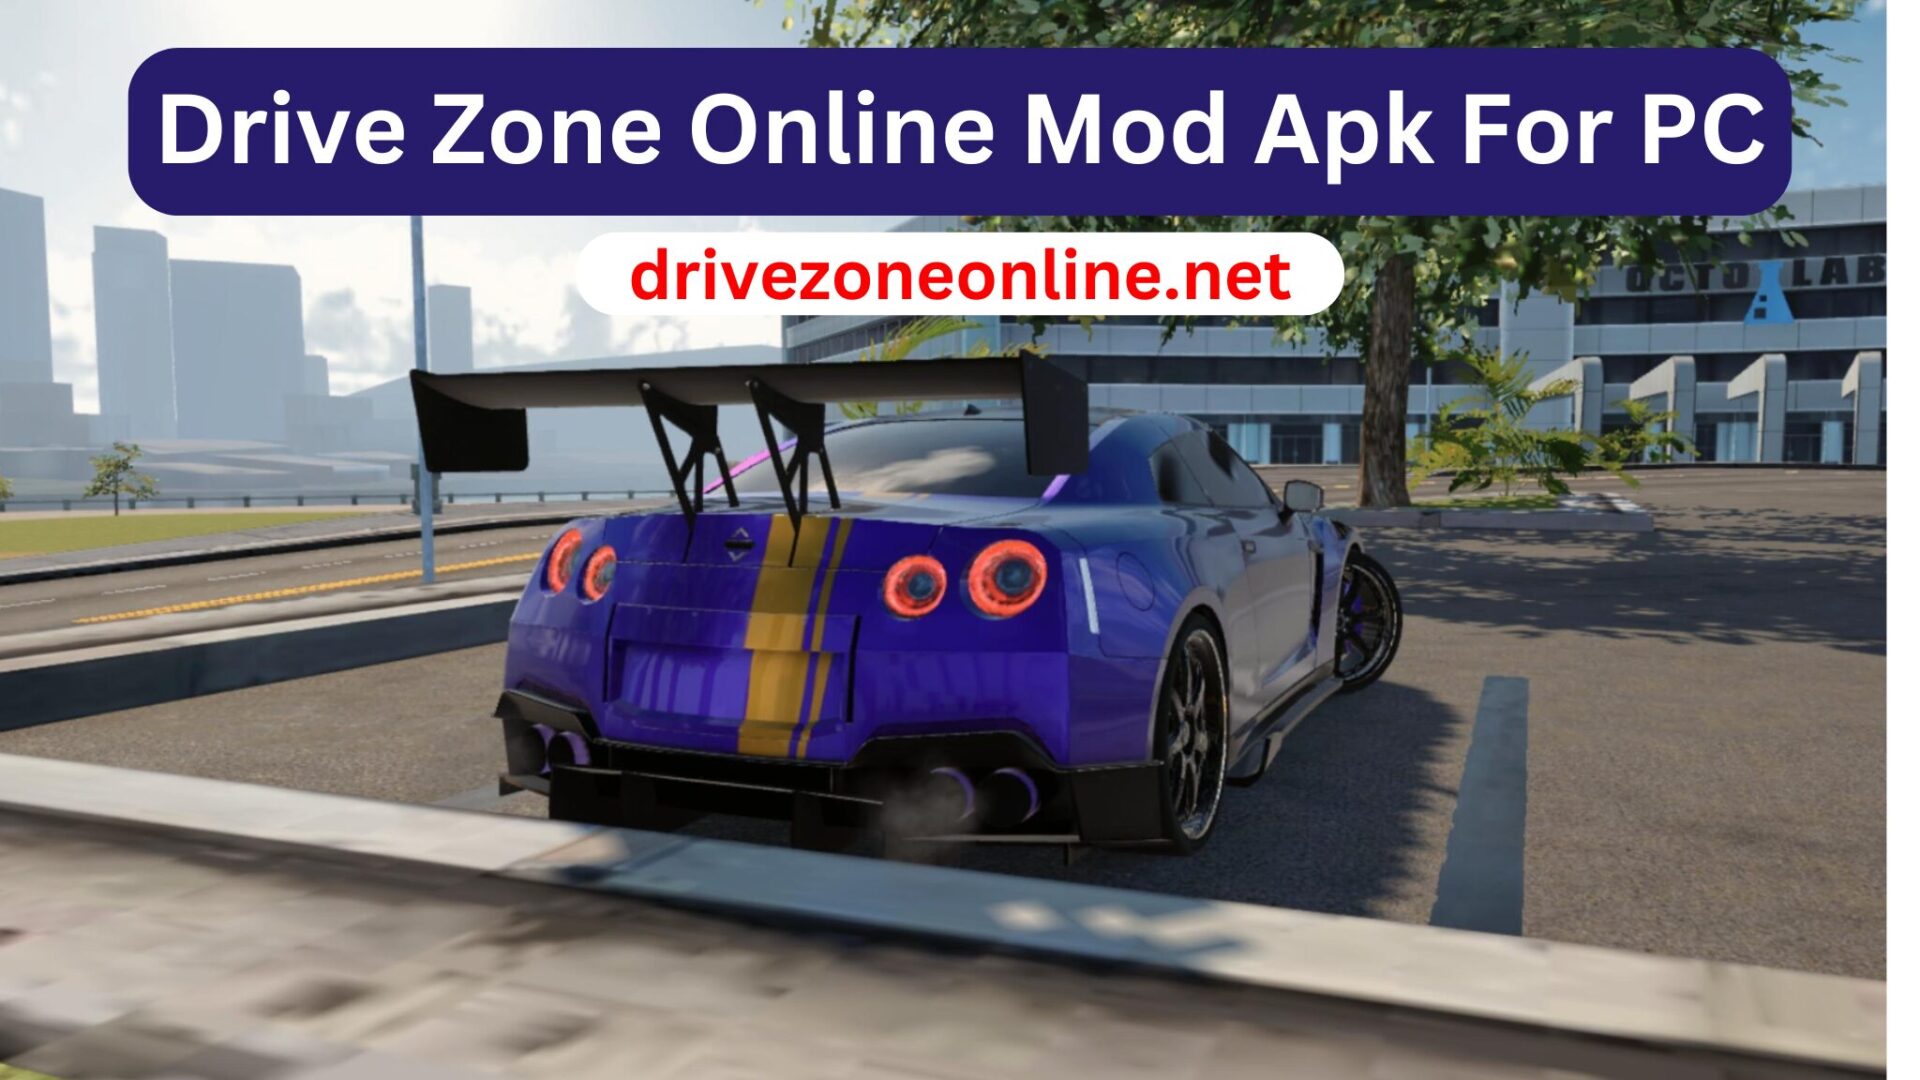 Drive Zone Online Mod Apk For PC